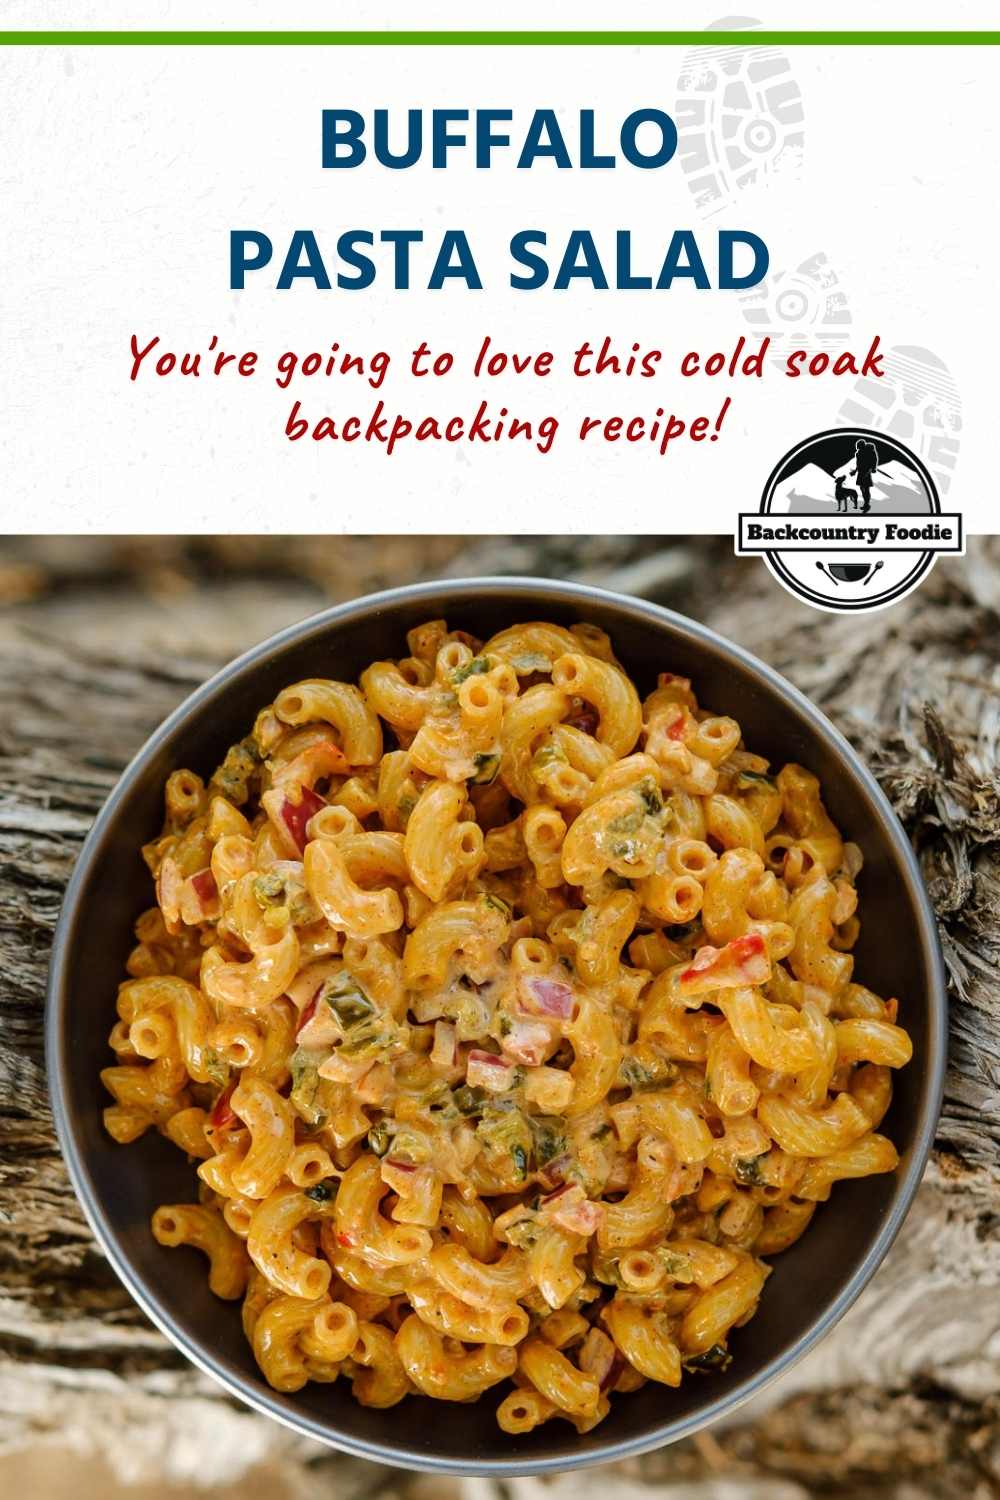 Freezer bag-style recipes, such as this one, can be prepared in a matter of minutes at home and just as easily while backpacking. Add ingredients to a baggie or container at home and add cold water on the trail. It's truly that easy! #backpackingmeal #backpackingrecipe #backpackinglunch #backcountryfoodie